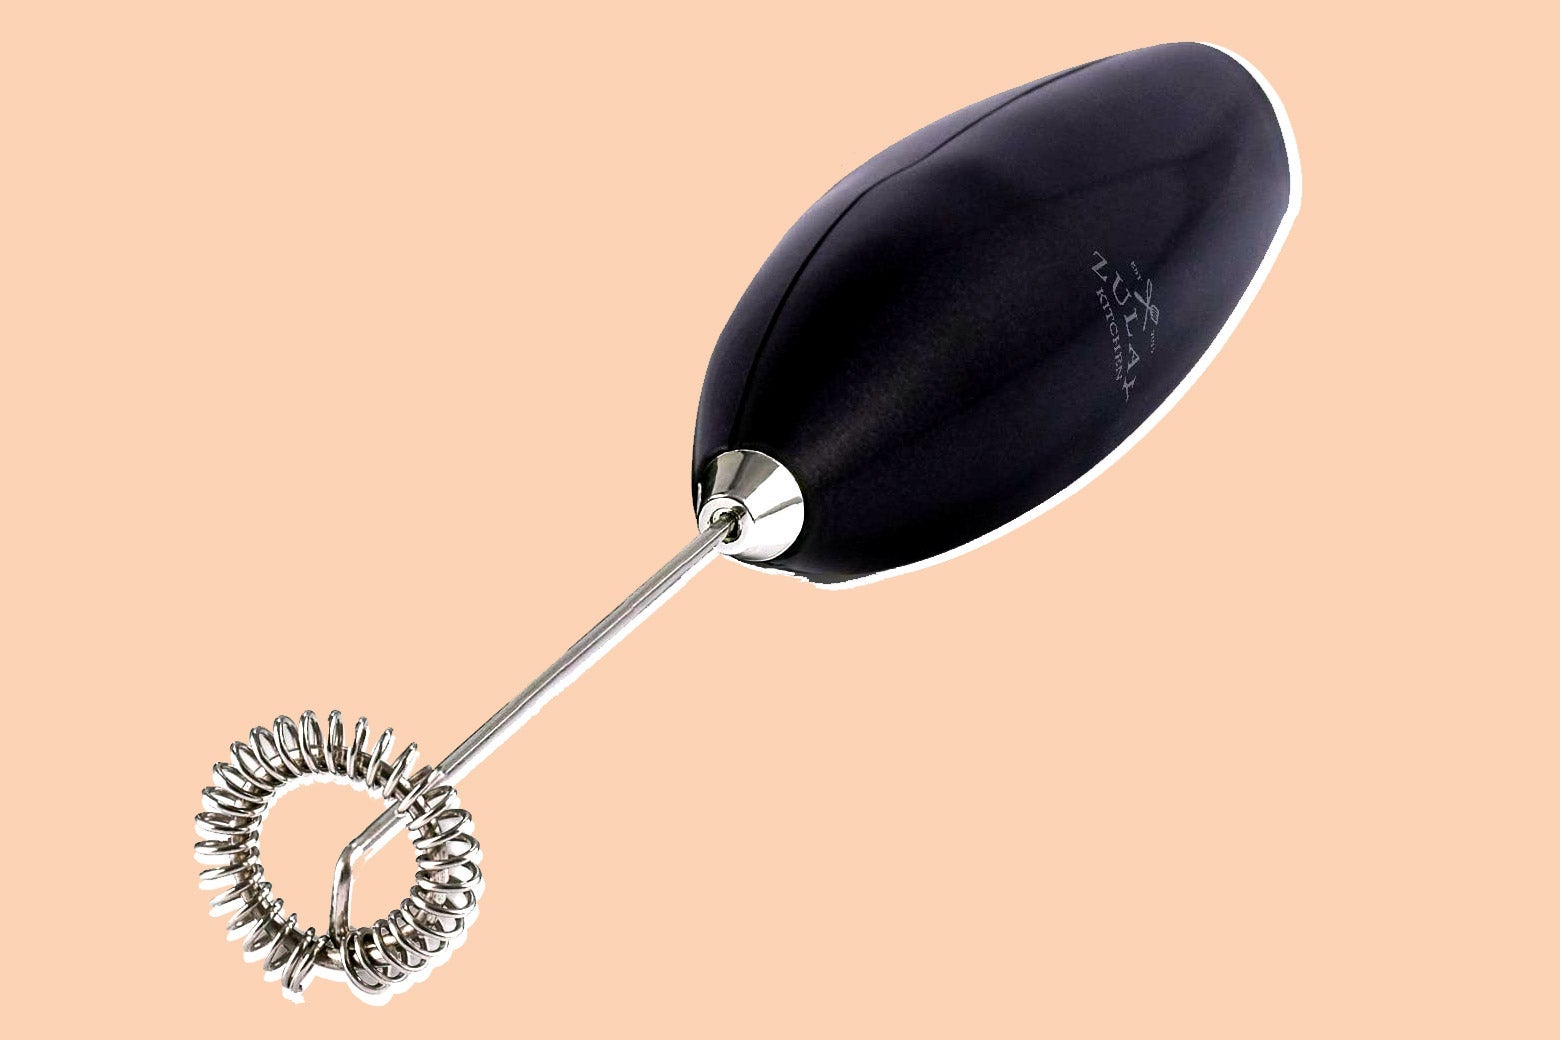 Zulay Original Milk Frother Handheld Foam Maker for Lattes - Whisk Drink Mixer